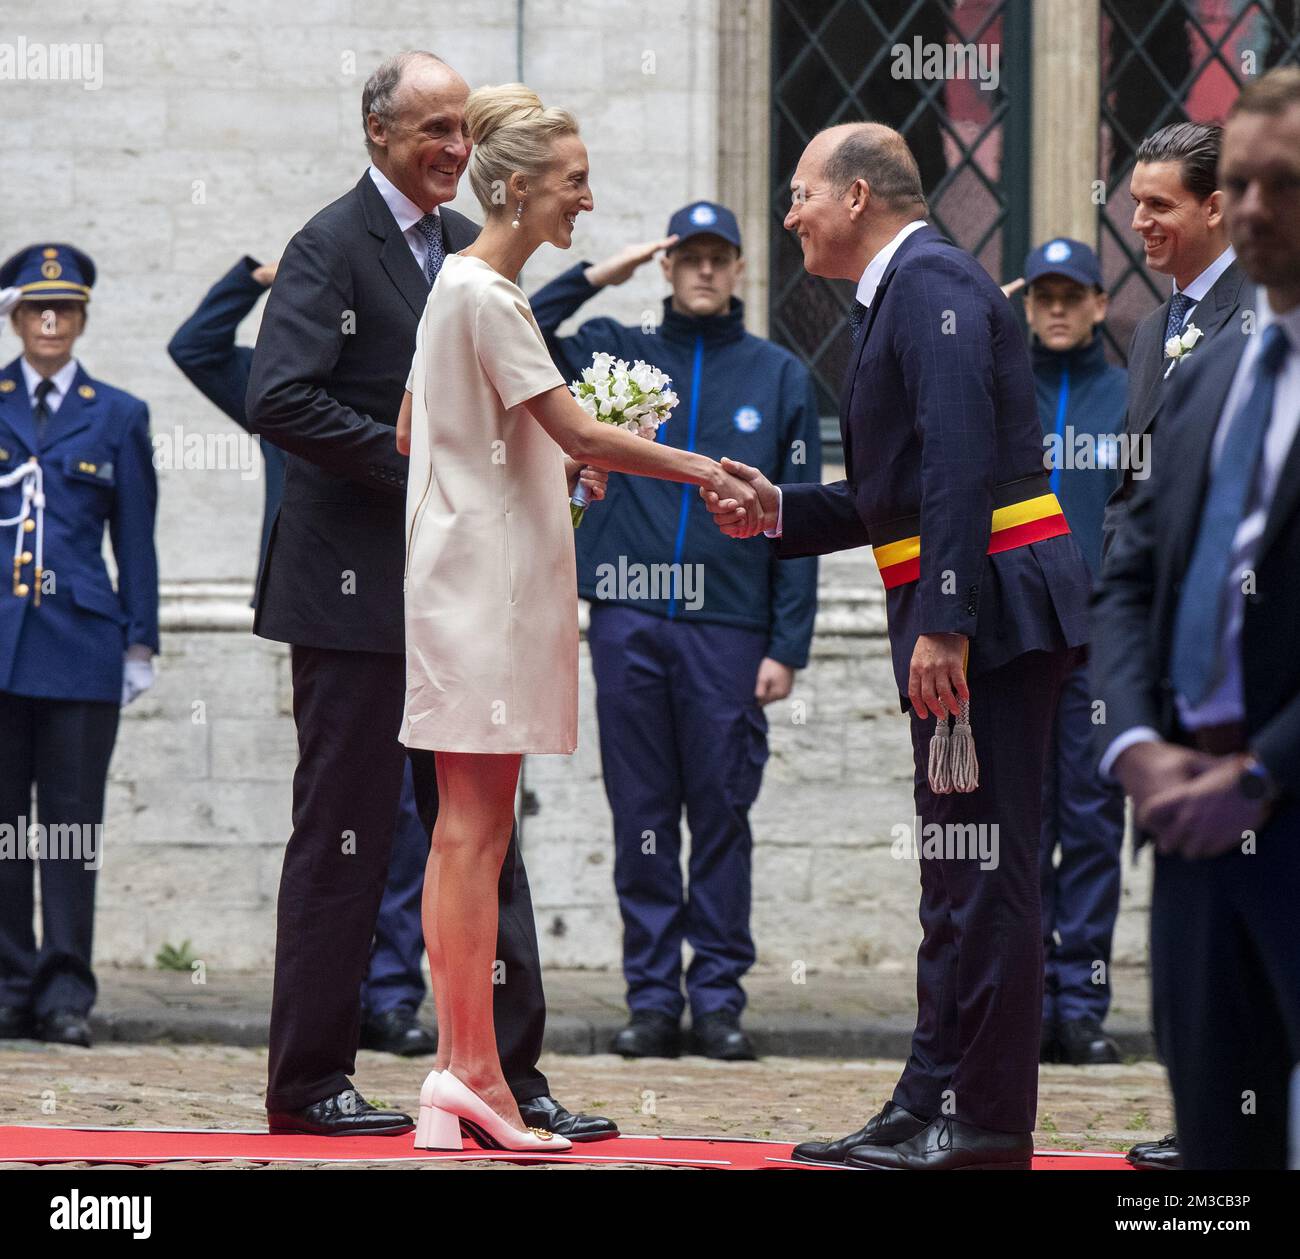 Prince Lorenz of Belgium, Princess Maria Laura, Brussel-bruxelles City  Mayor Philippe Close and William Isvy pictured at the arrival for the  official wedding at the Brussels City Hall, of Princess Maria-Laura of